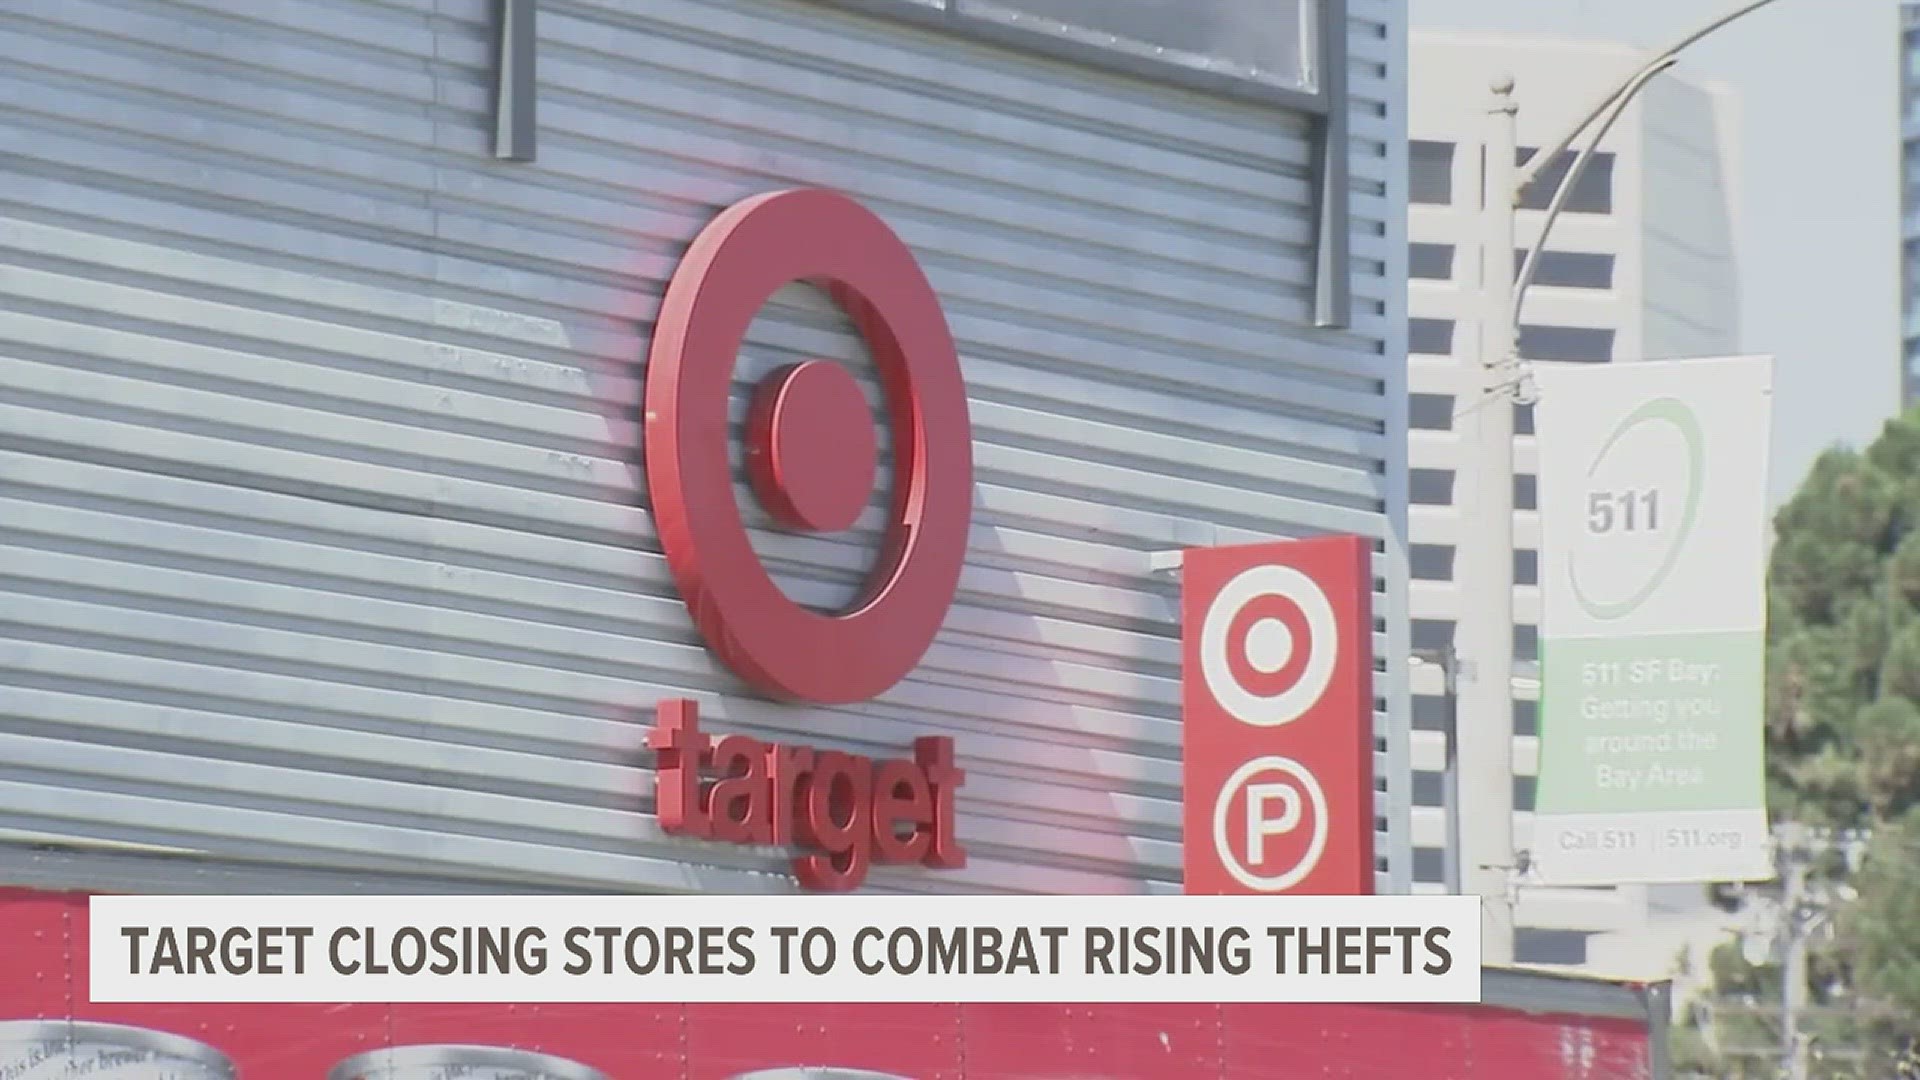 Efforts by Target include hiring more security and locking up specific merchandise. Nine stores will be closed, none of them in Iowa or Illinois.